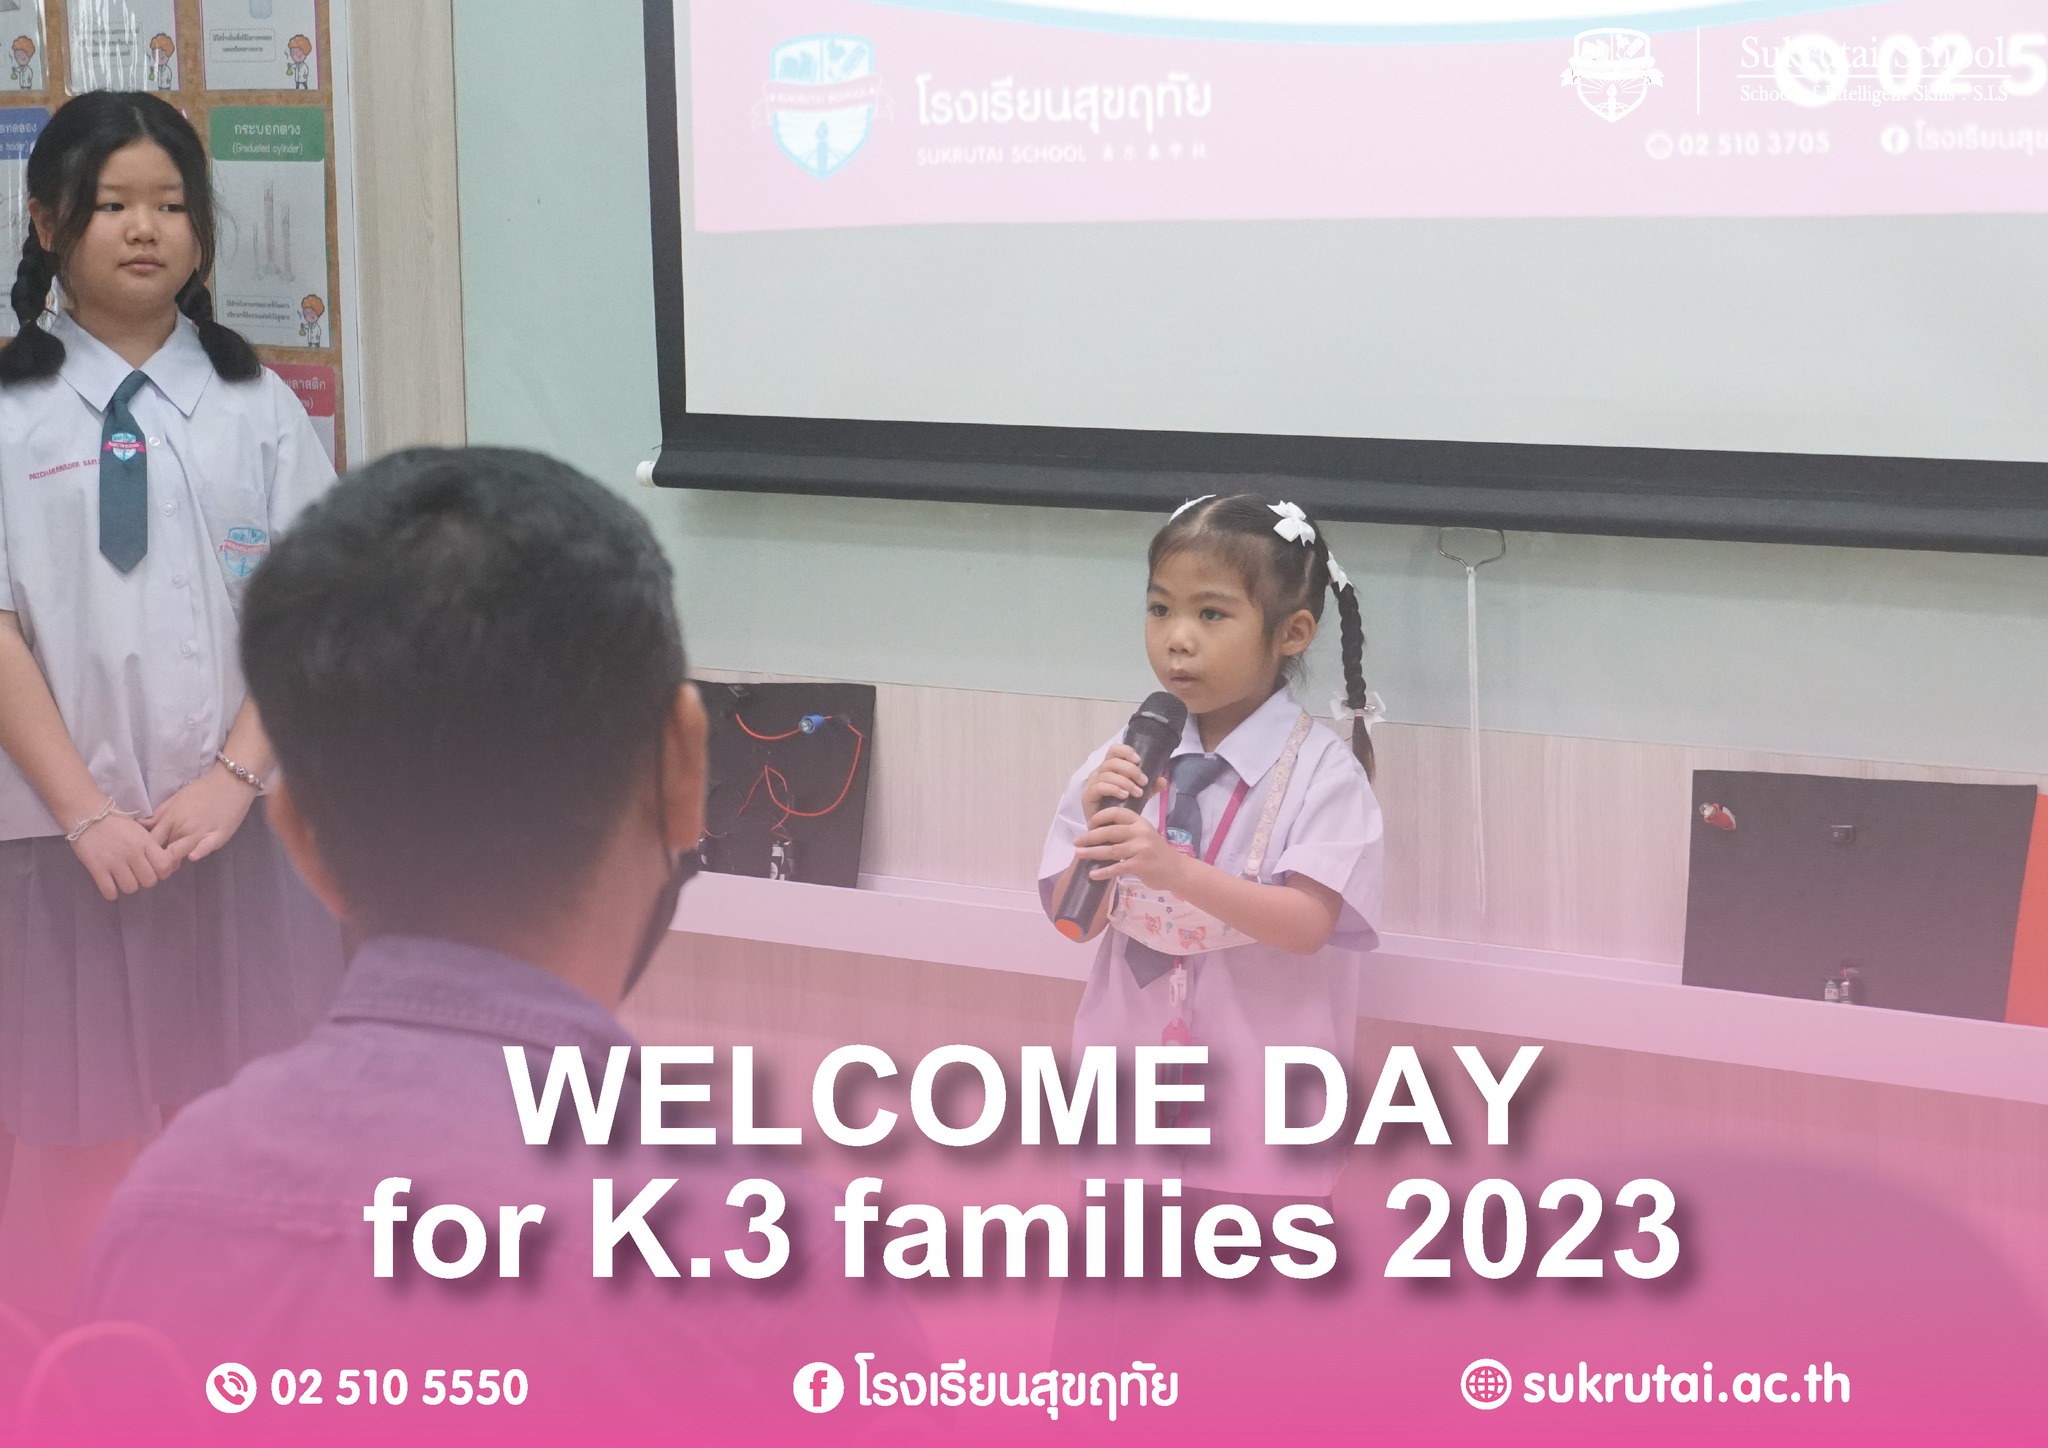 WELCOME DAY for K.3 families 2023